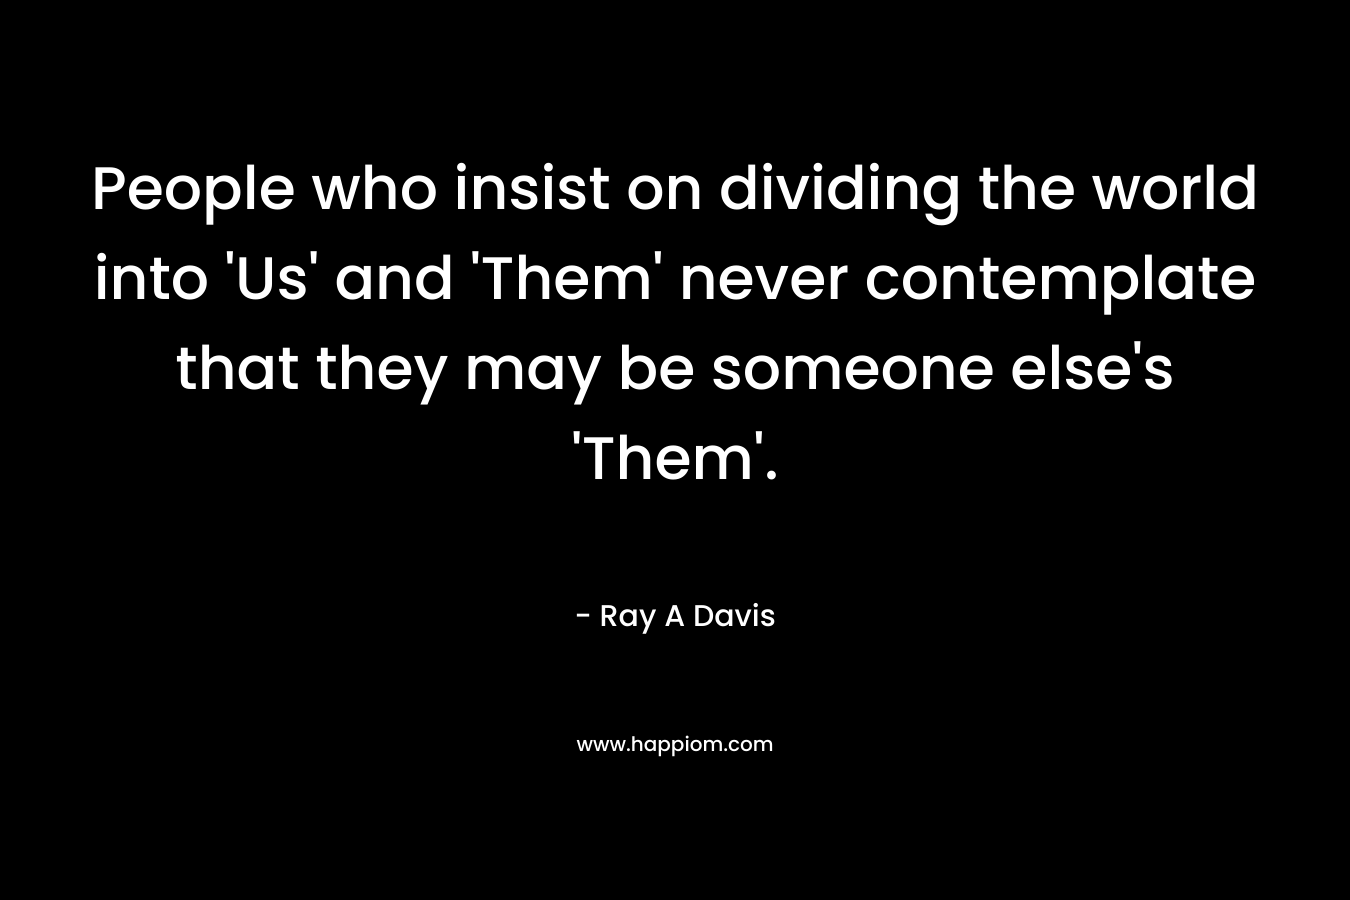 People who insist on dividing the world into ‘Us’ and ‘Them’ never contemplate that they may be someone else’s ‘Them’. – Ray A Davis